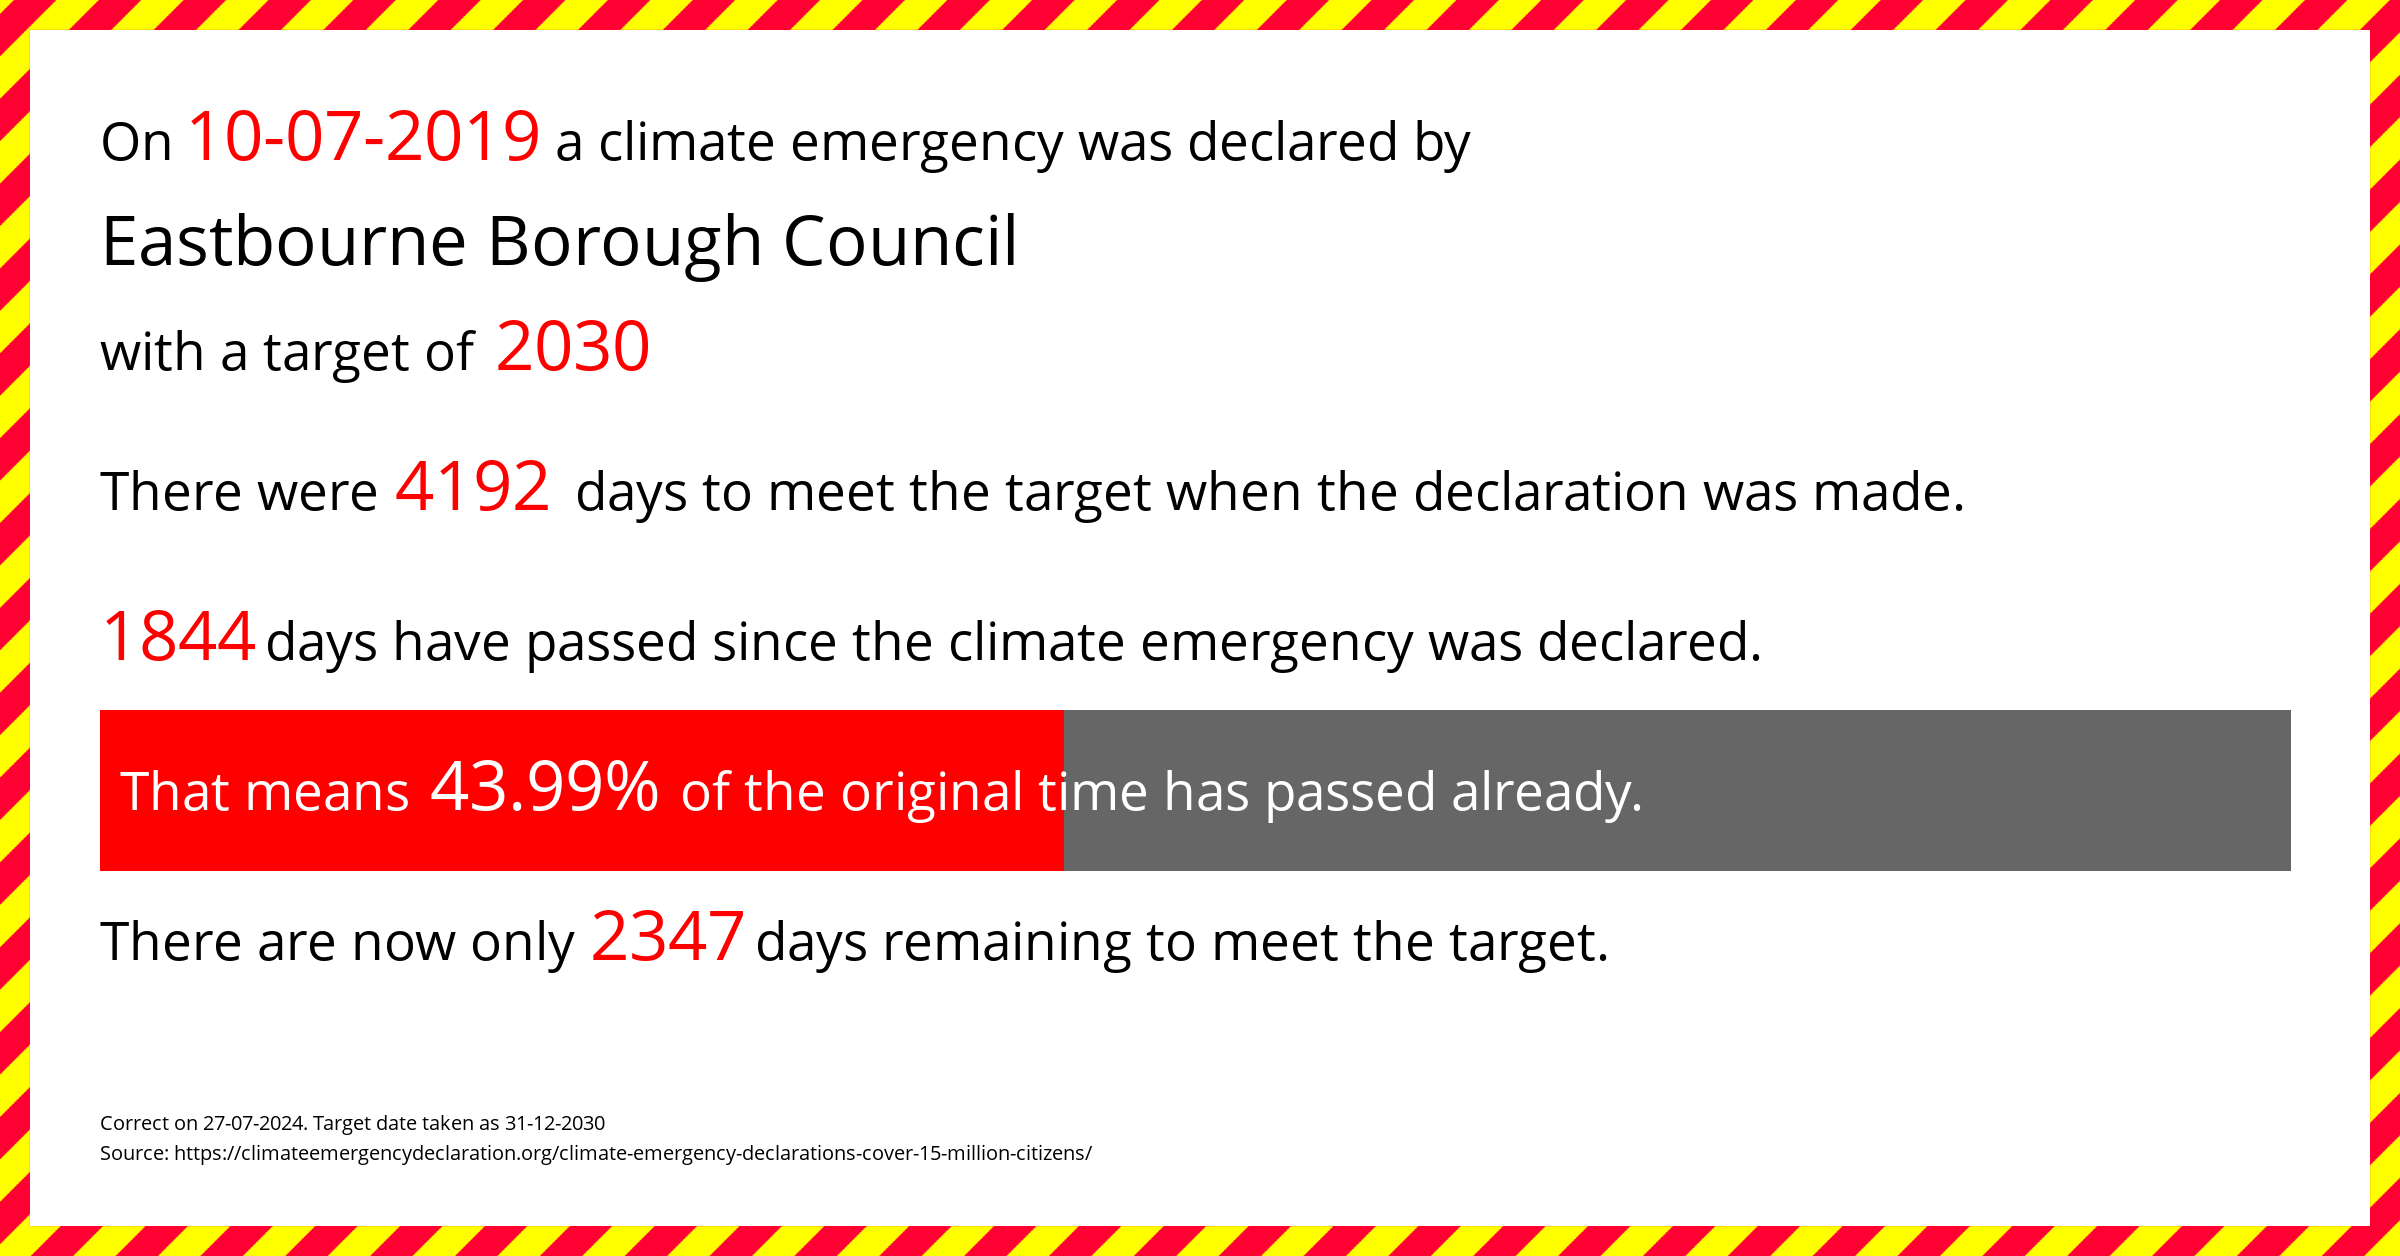 Eastbourne Borough Council declared a Climate emergency on Wednesday 10th July 2019, with a target of 2030.